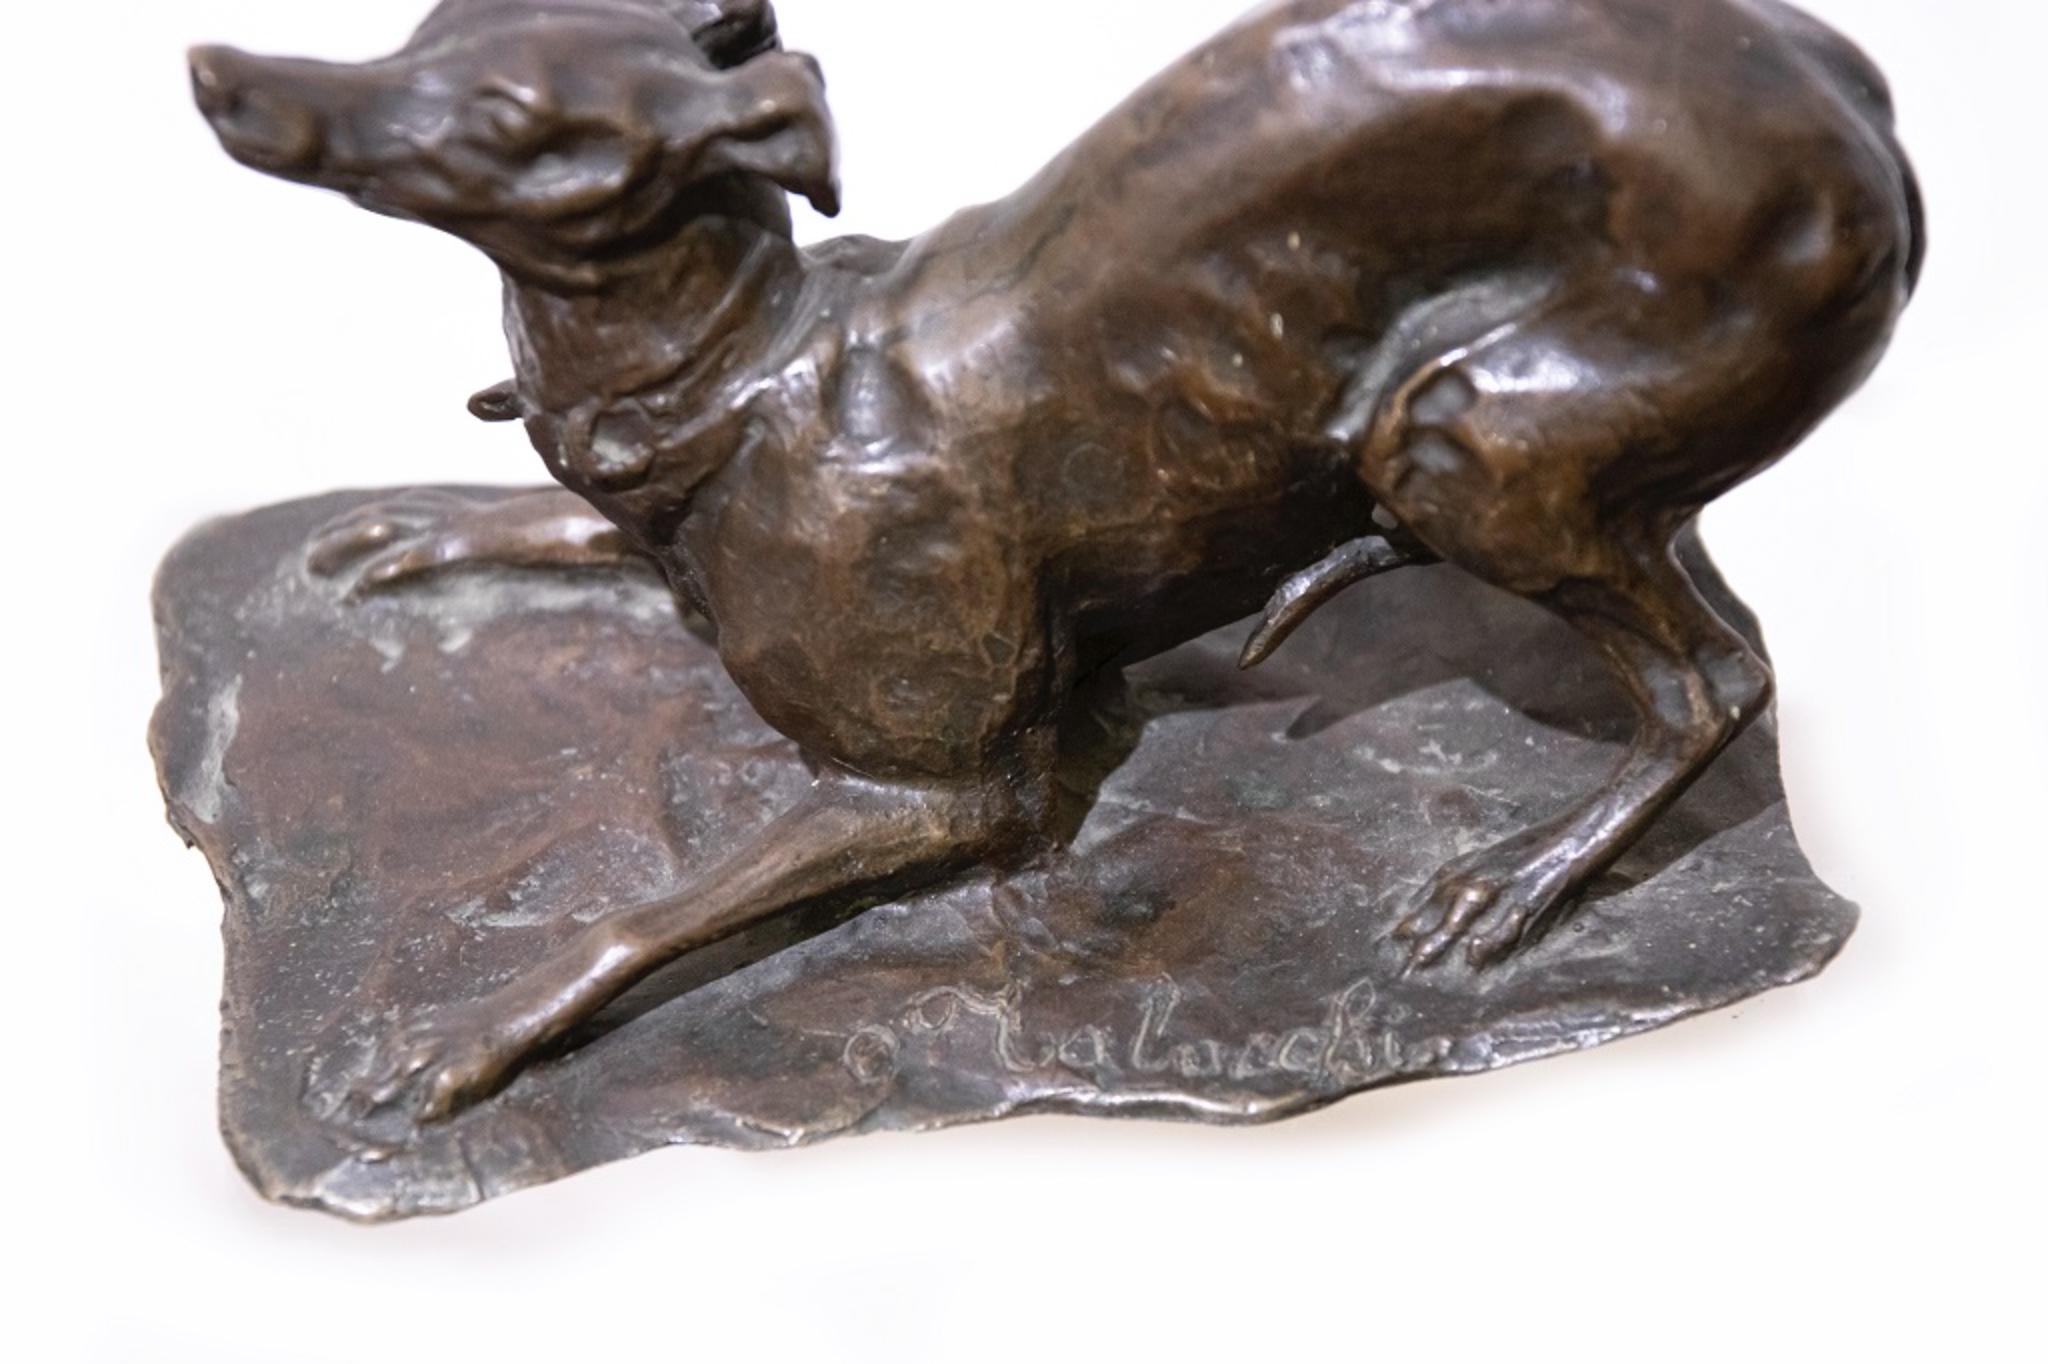 Dog is a glass decorative object realized in the first decades of the 20th century by the Italian artist Odoardo Tabacchi (Valganna, 1831 - Milan, 1905). 

Made in Italy.

Bronze.

Hand-signed by the artist on the base: Tabacchi.

Very good